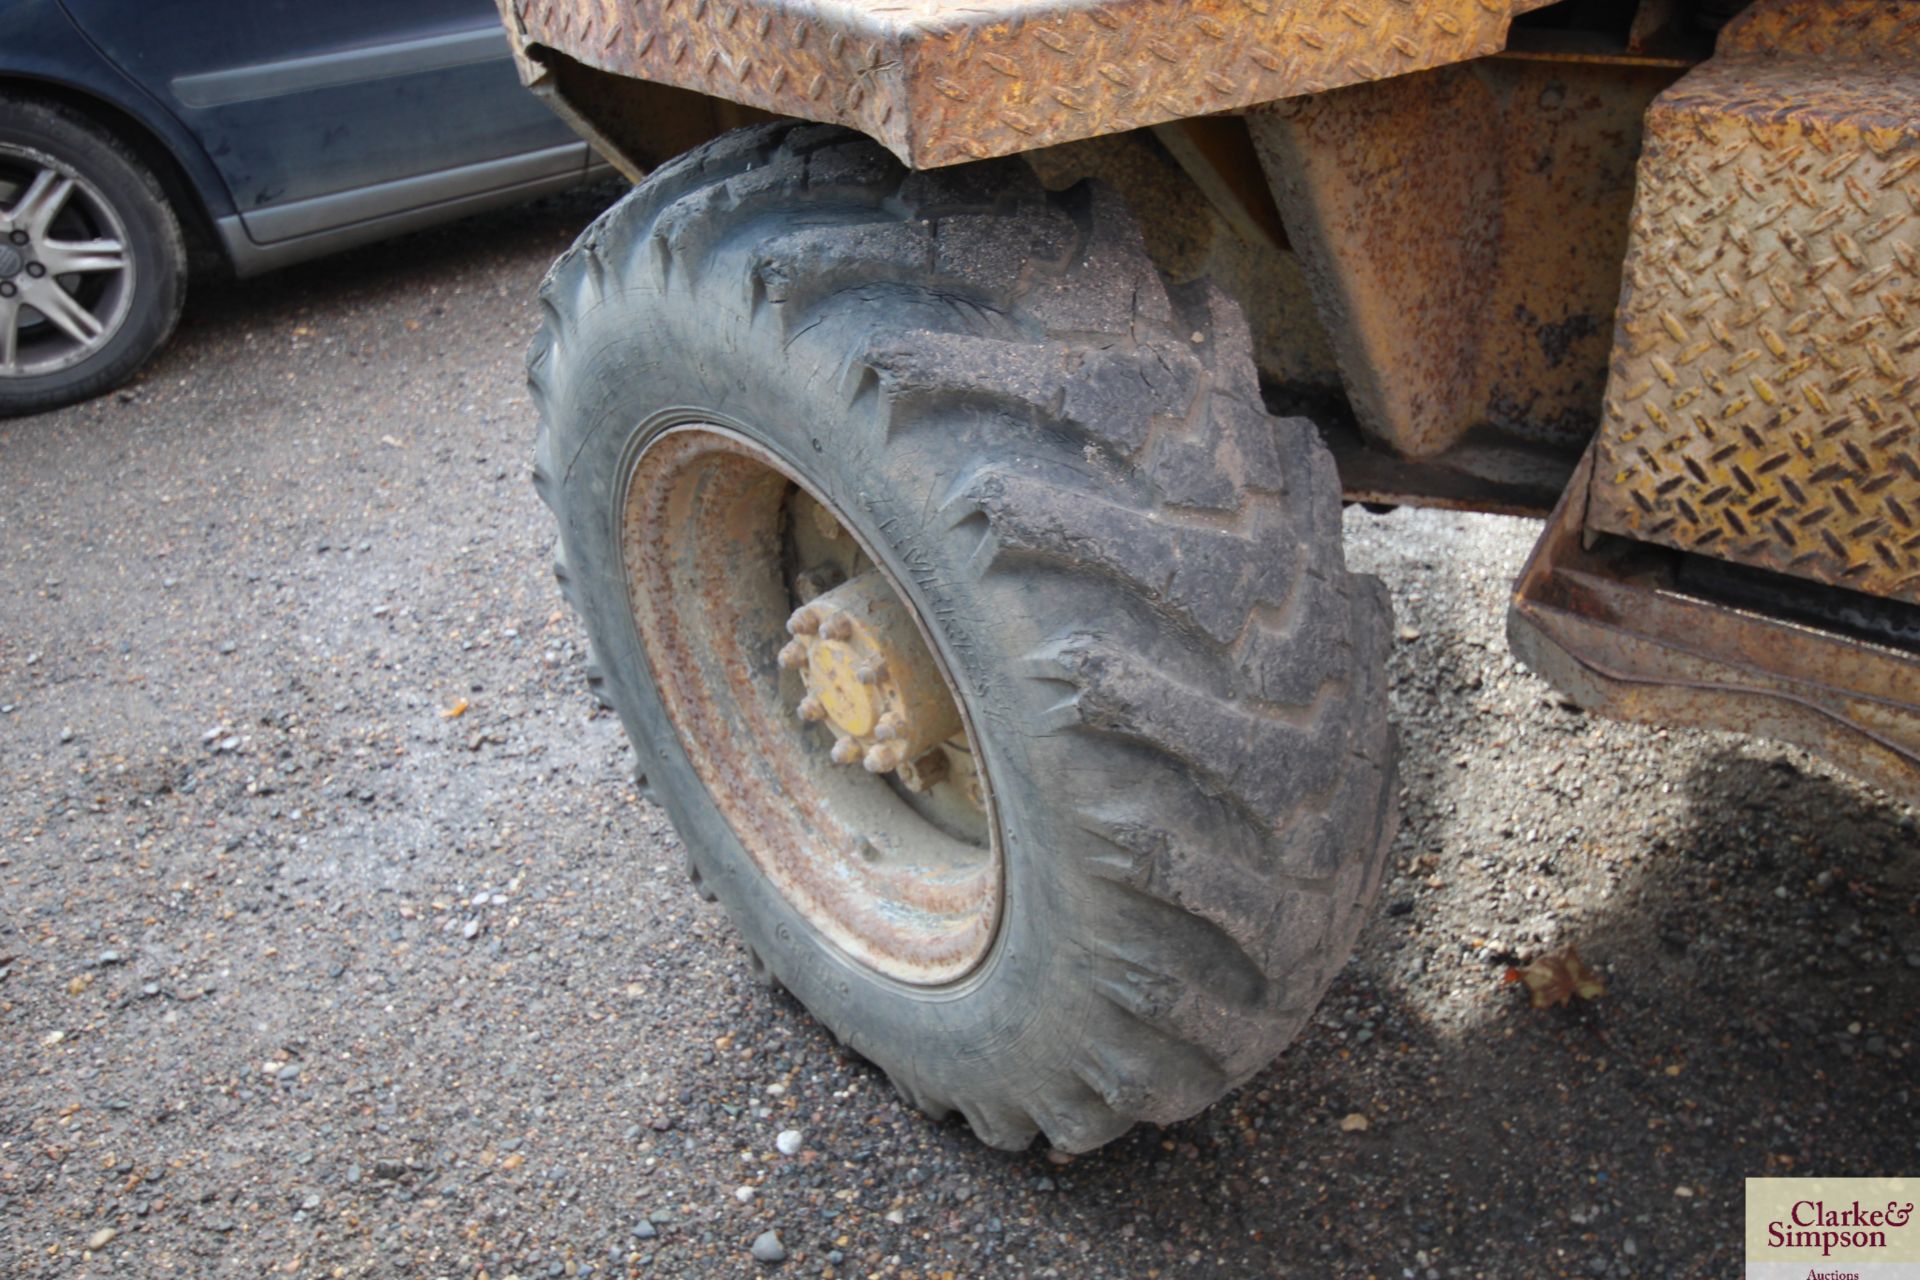 Thwaites Alldrive 4WD dumper. 12.0/80-18 wheels and tyres. - Image 9 of 18